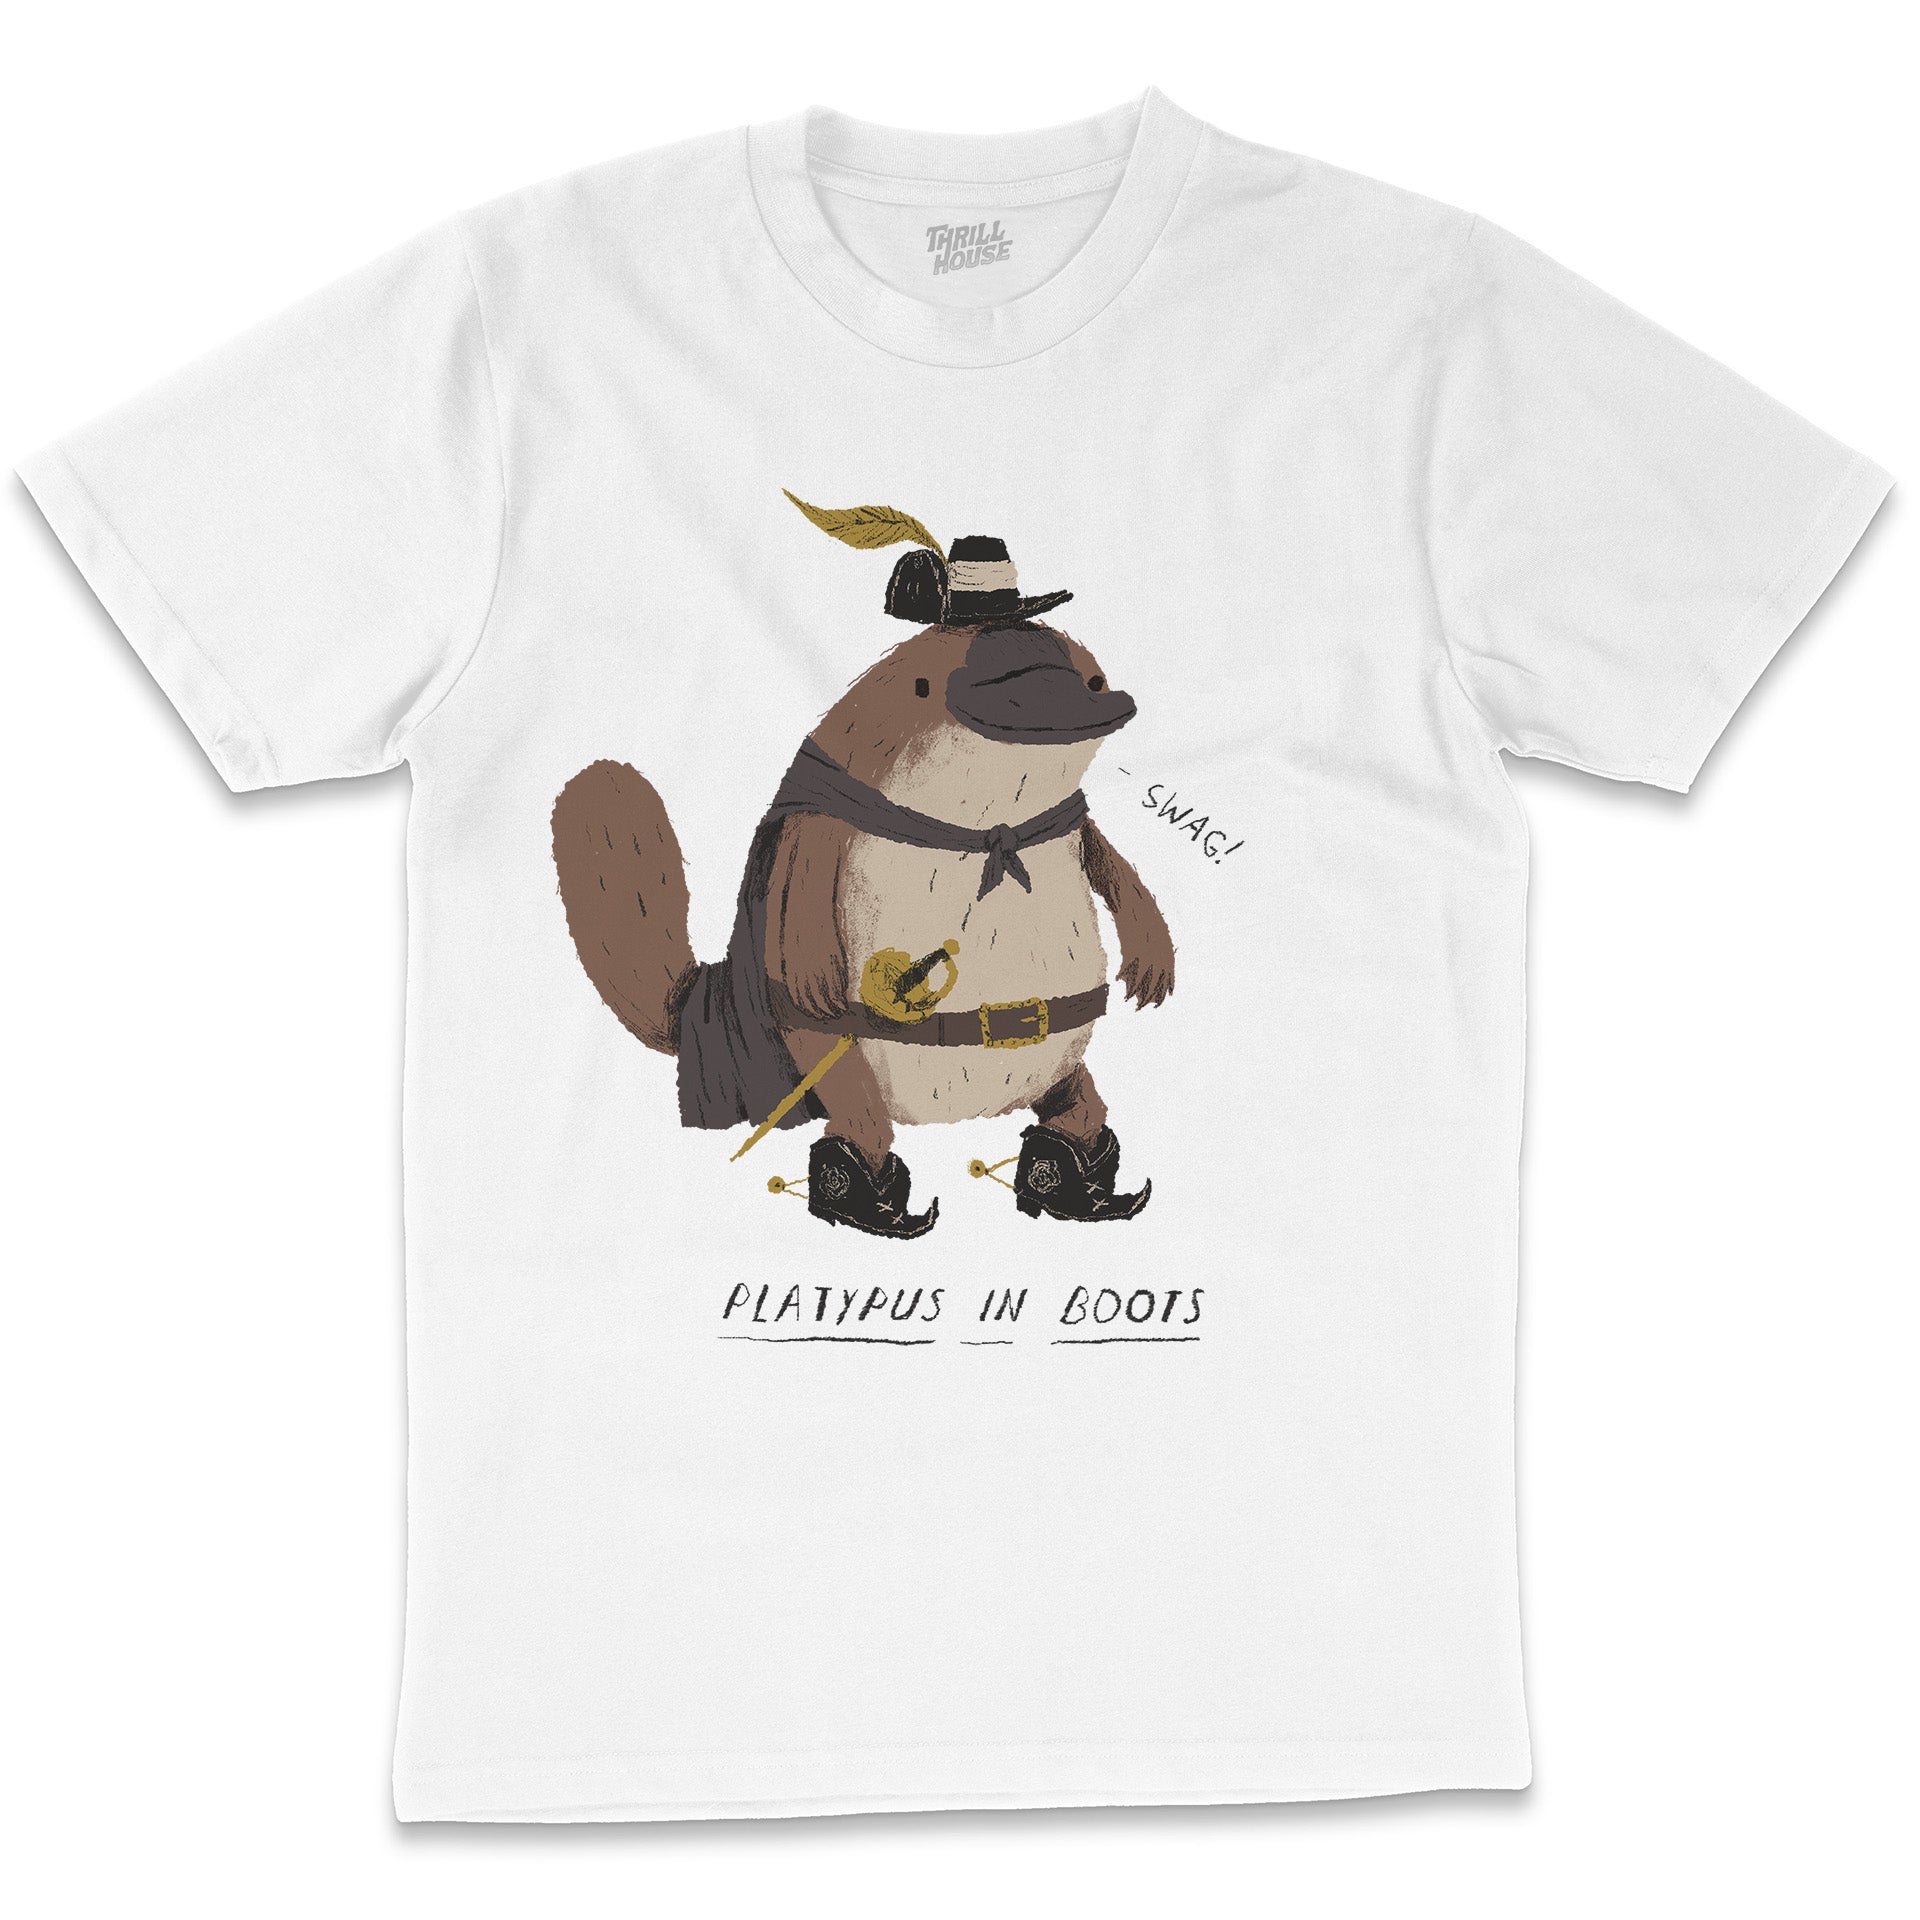 Platypus in Boots Funny Parody Pun Animal Cotton T-Shirt